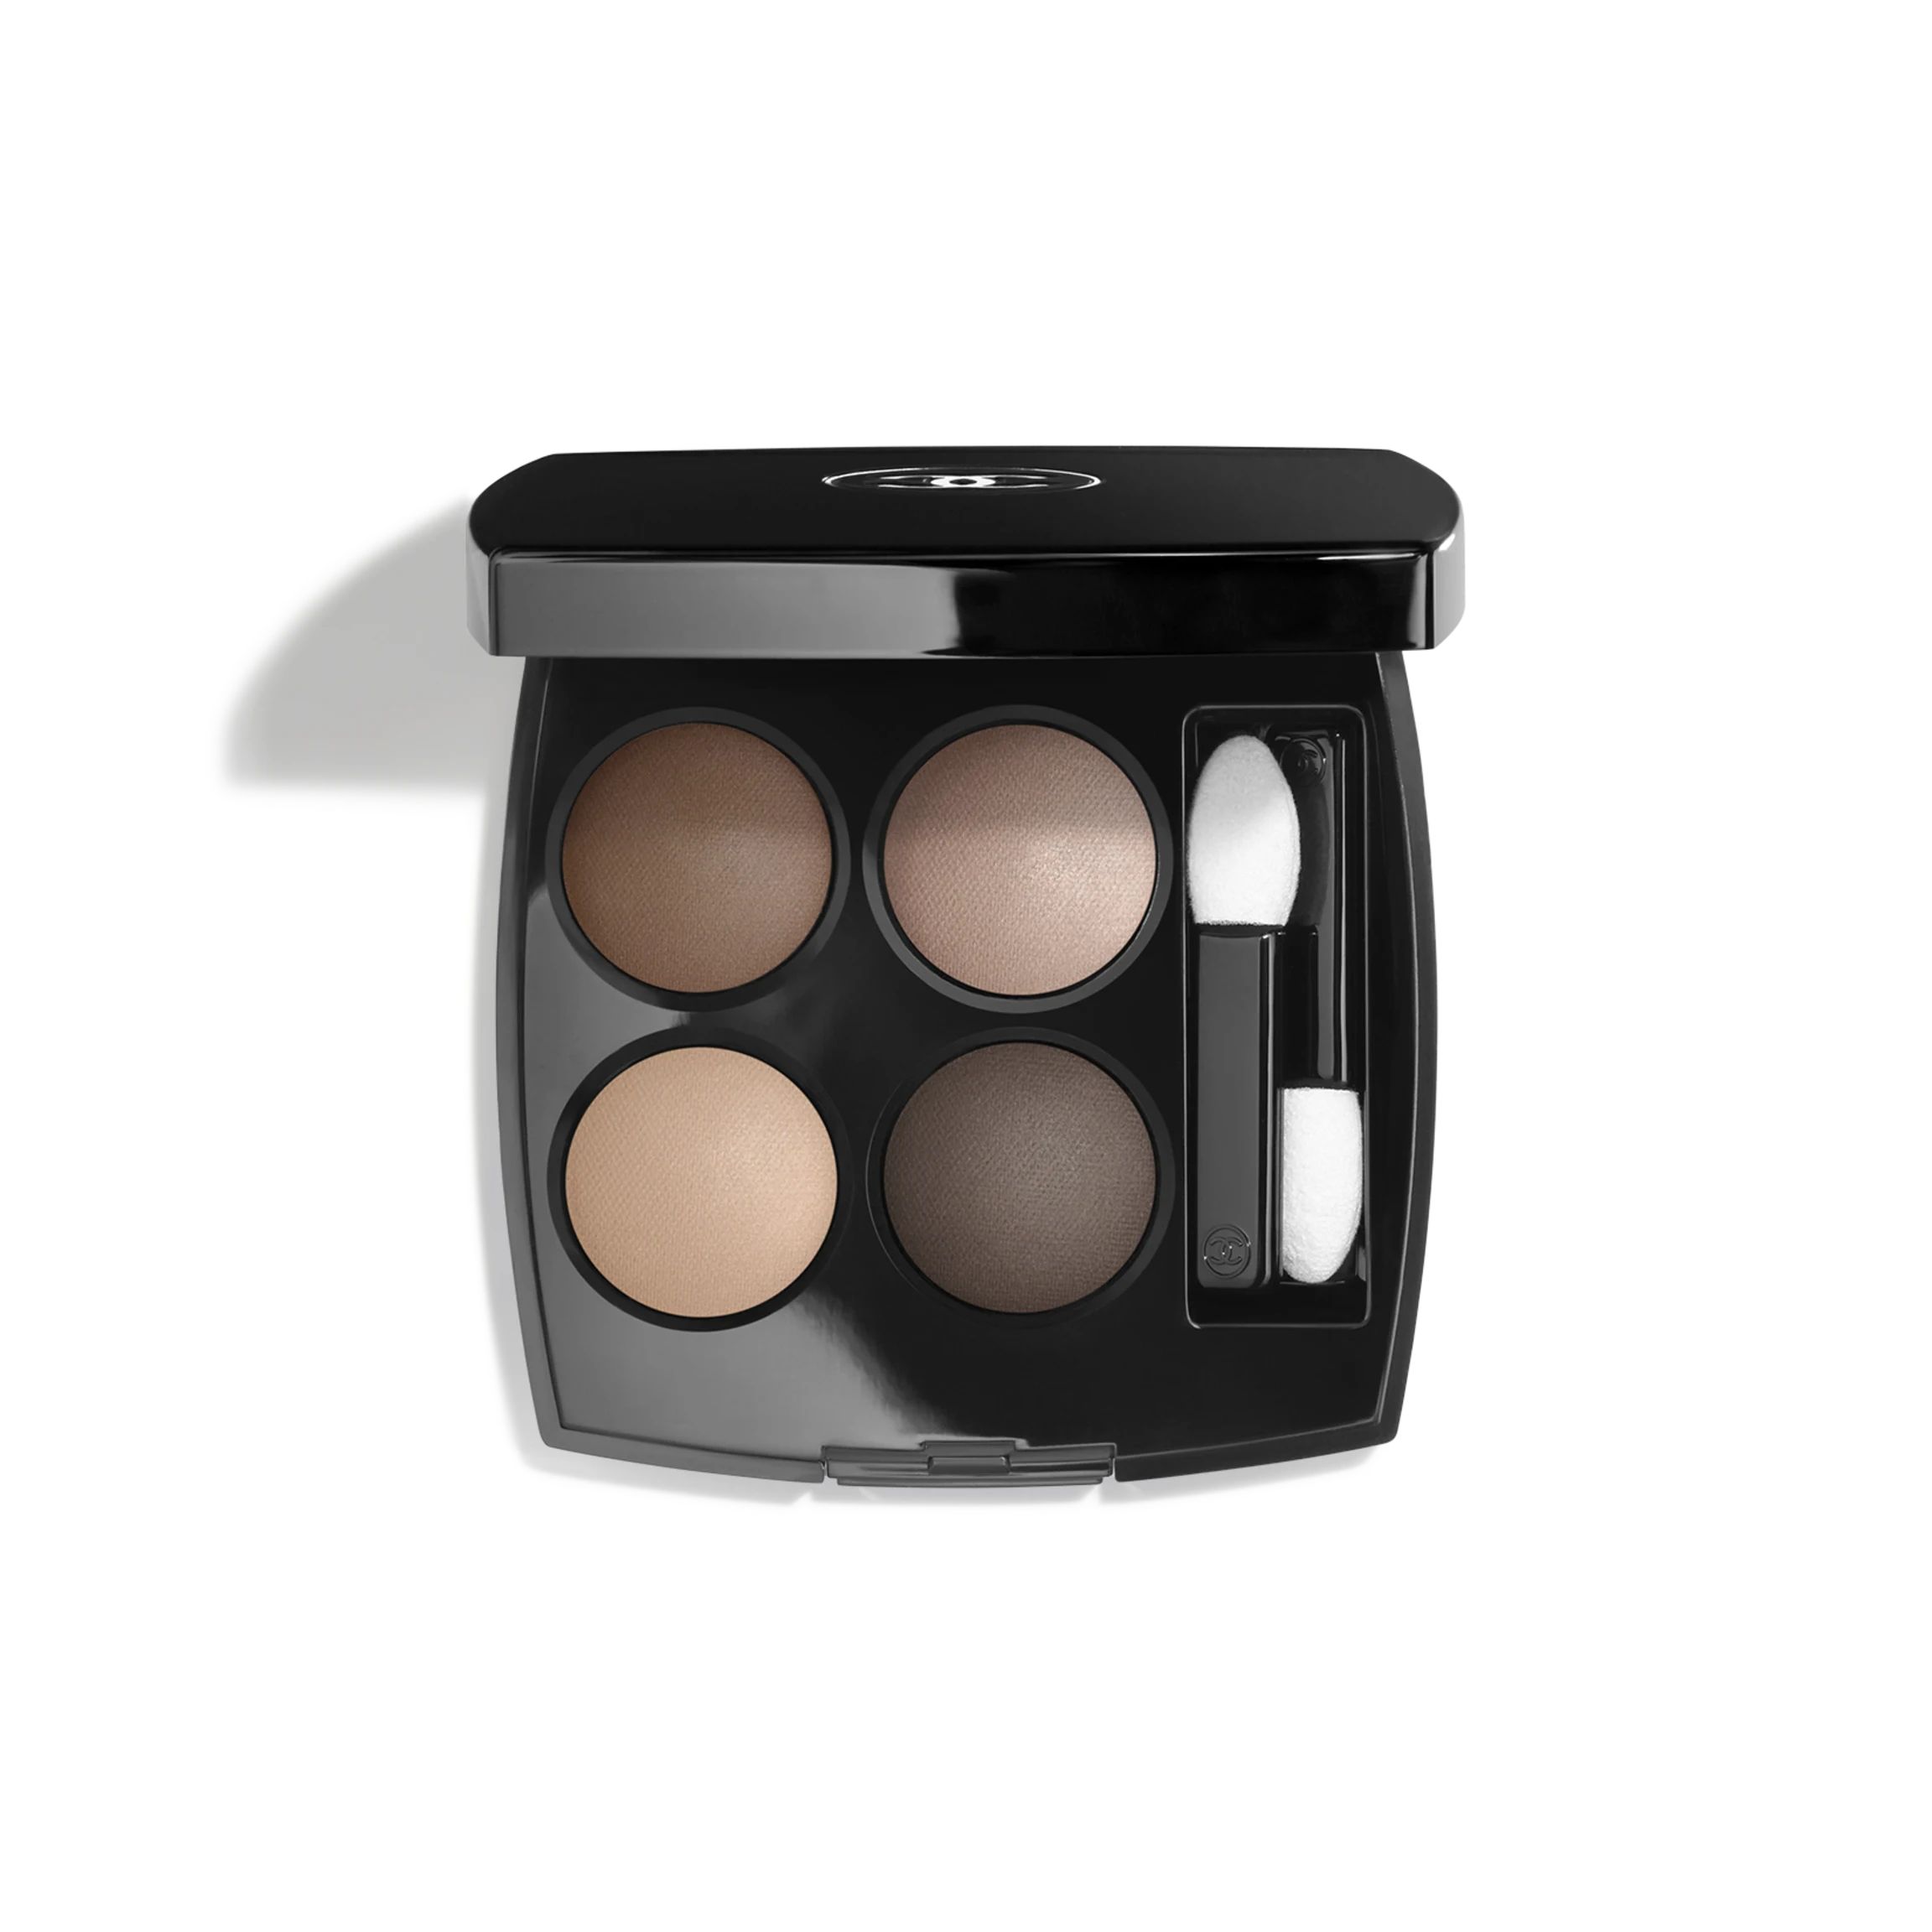 LES 4 OMBRES Multi-effect quadra eyeshadow 308 - Clair-obscur | CHANEL | Chanel, Inc. (US)